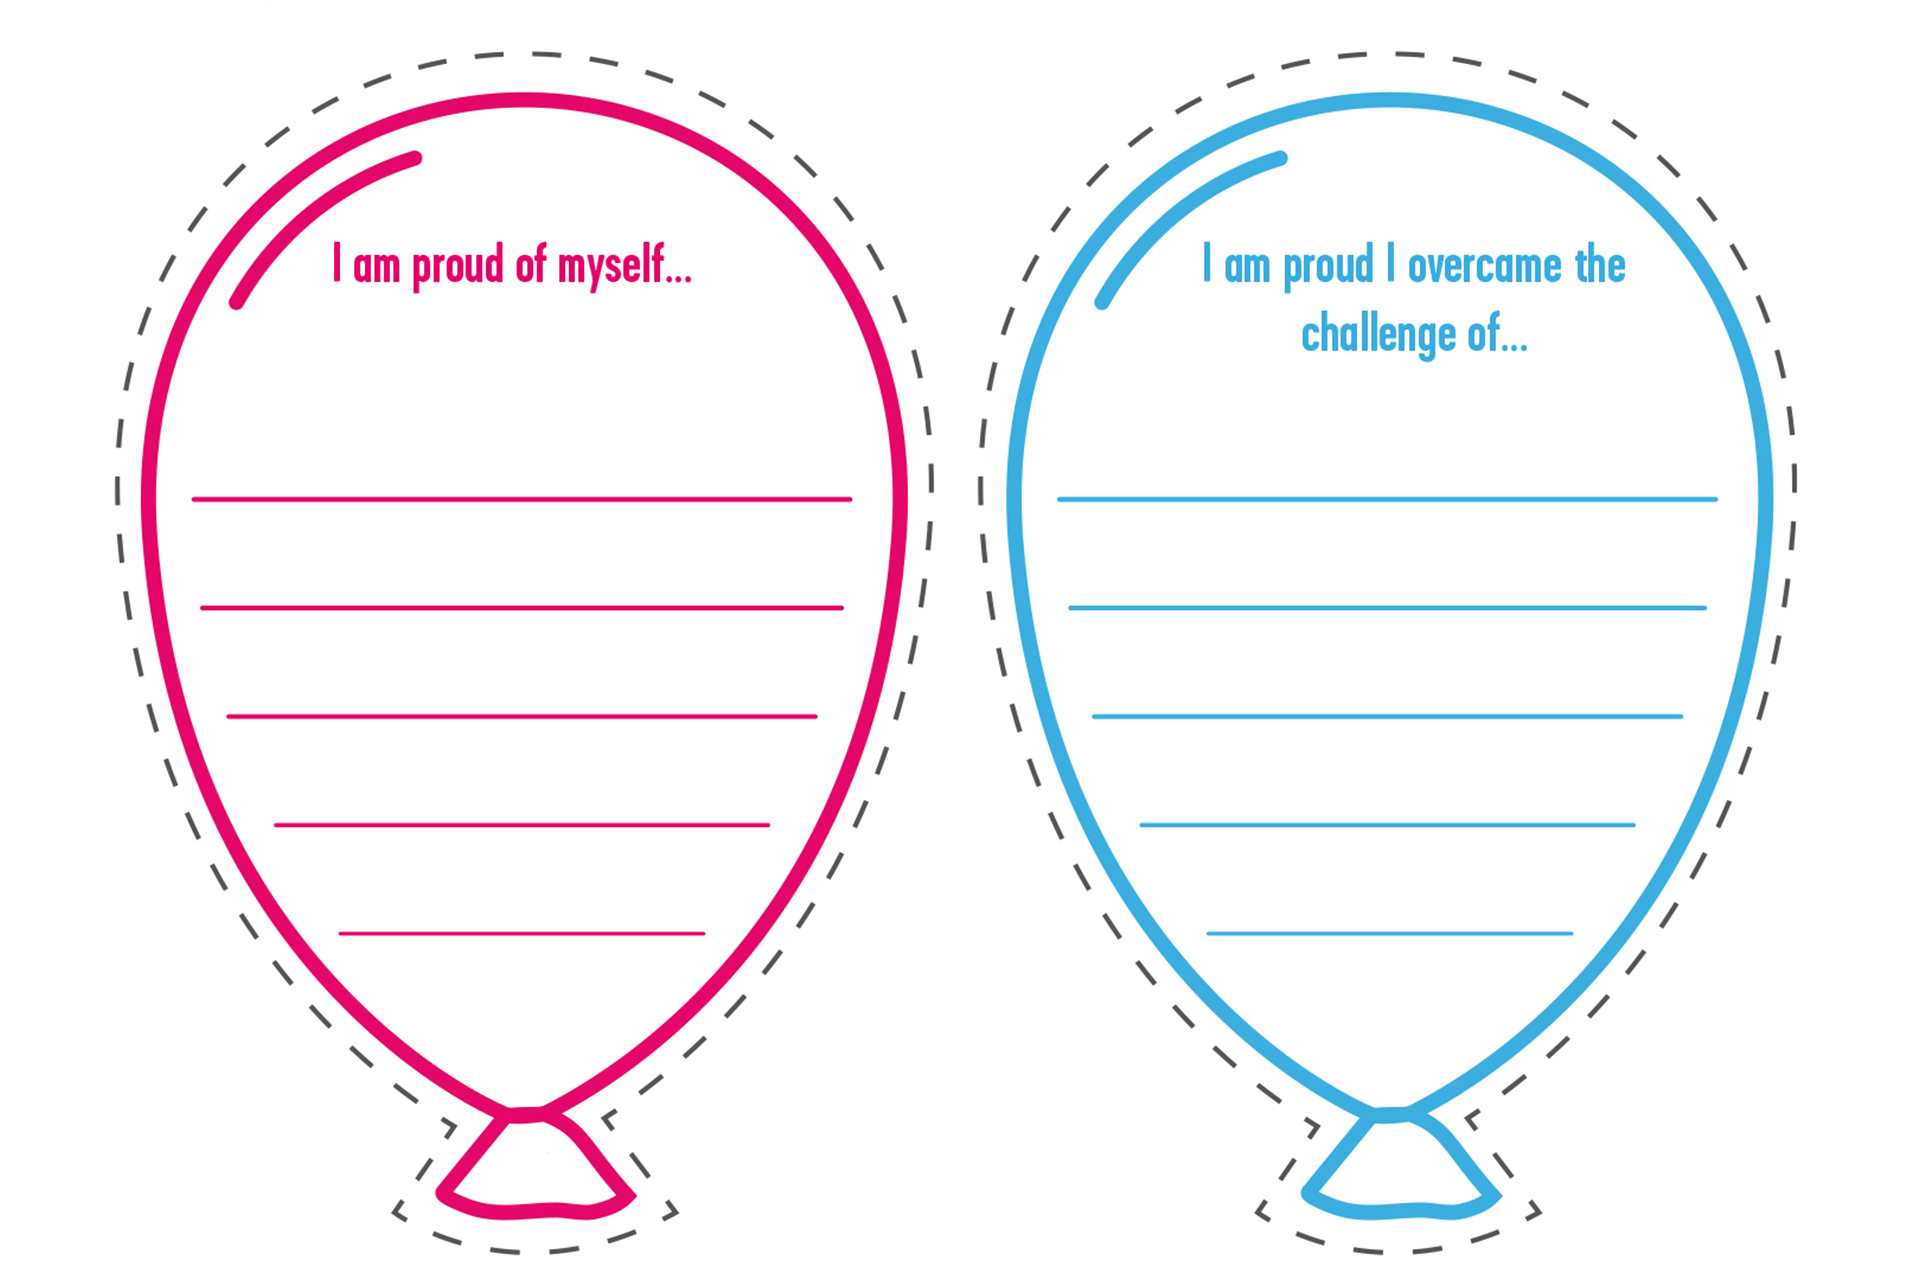 An image of our Balloons of Success Activity. On the left is a pink outline of a balloon, and on the right is a blue outline of a balloon. 